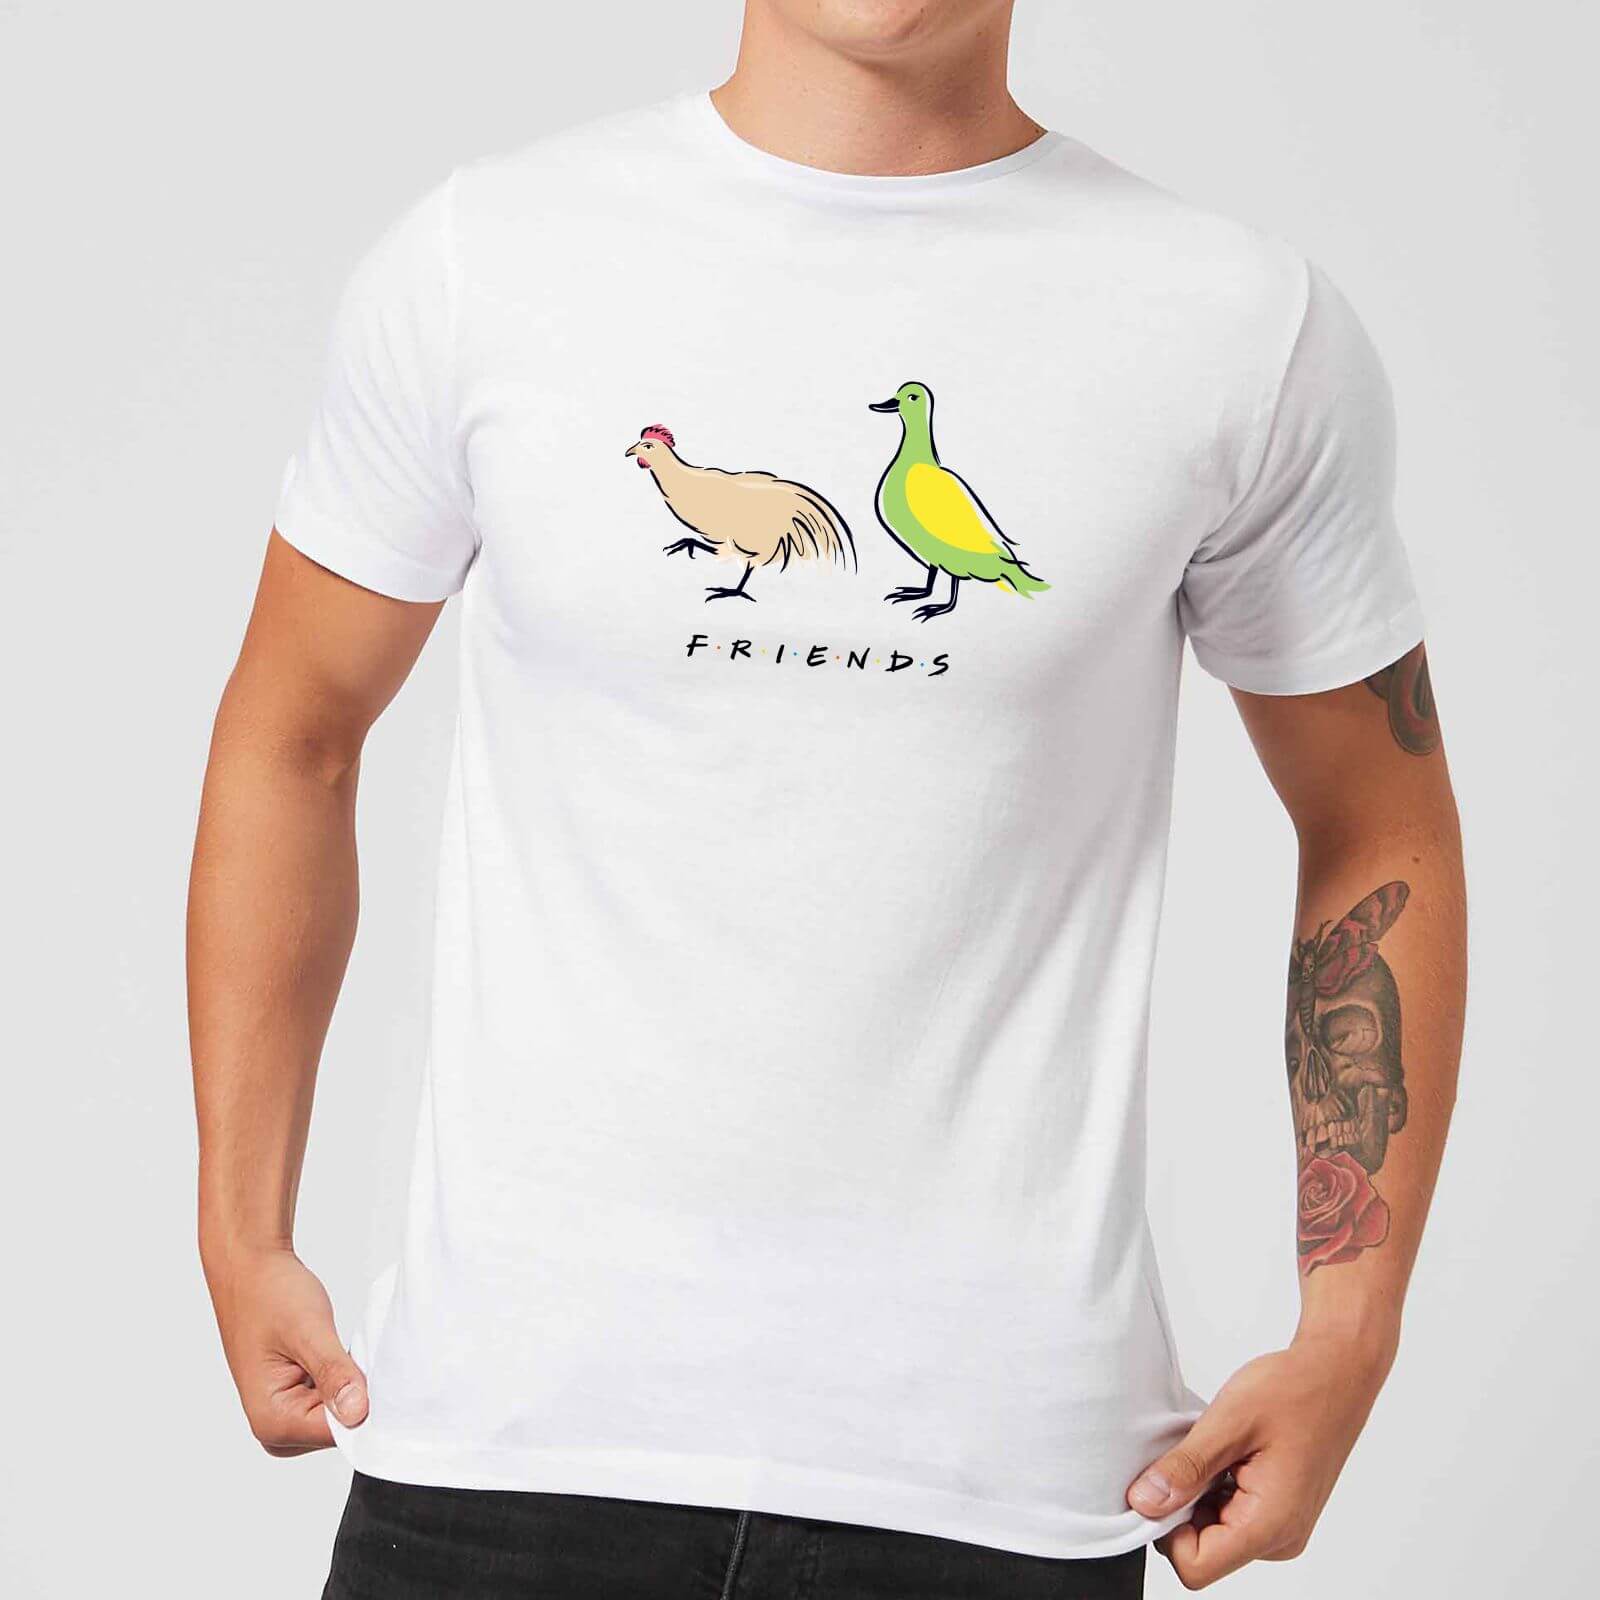 Friends The Chick And The Duck Men's T-Shirt - White - XS